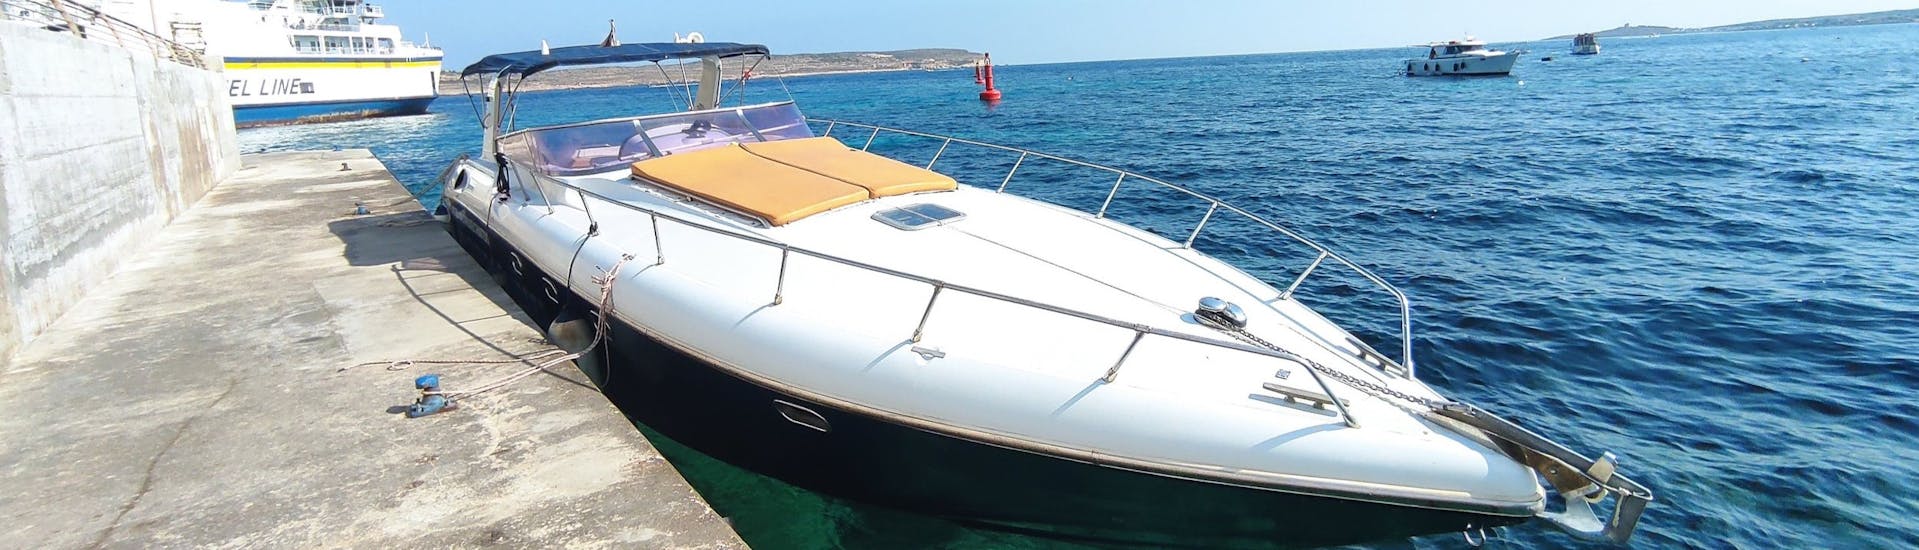 The boat used during the Private Boat Trip in Comino with Snorkeling.